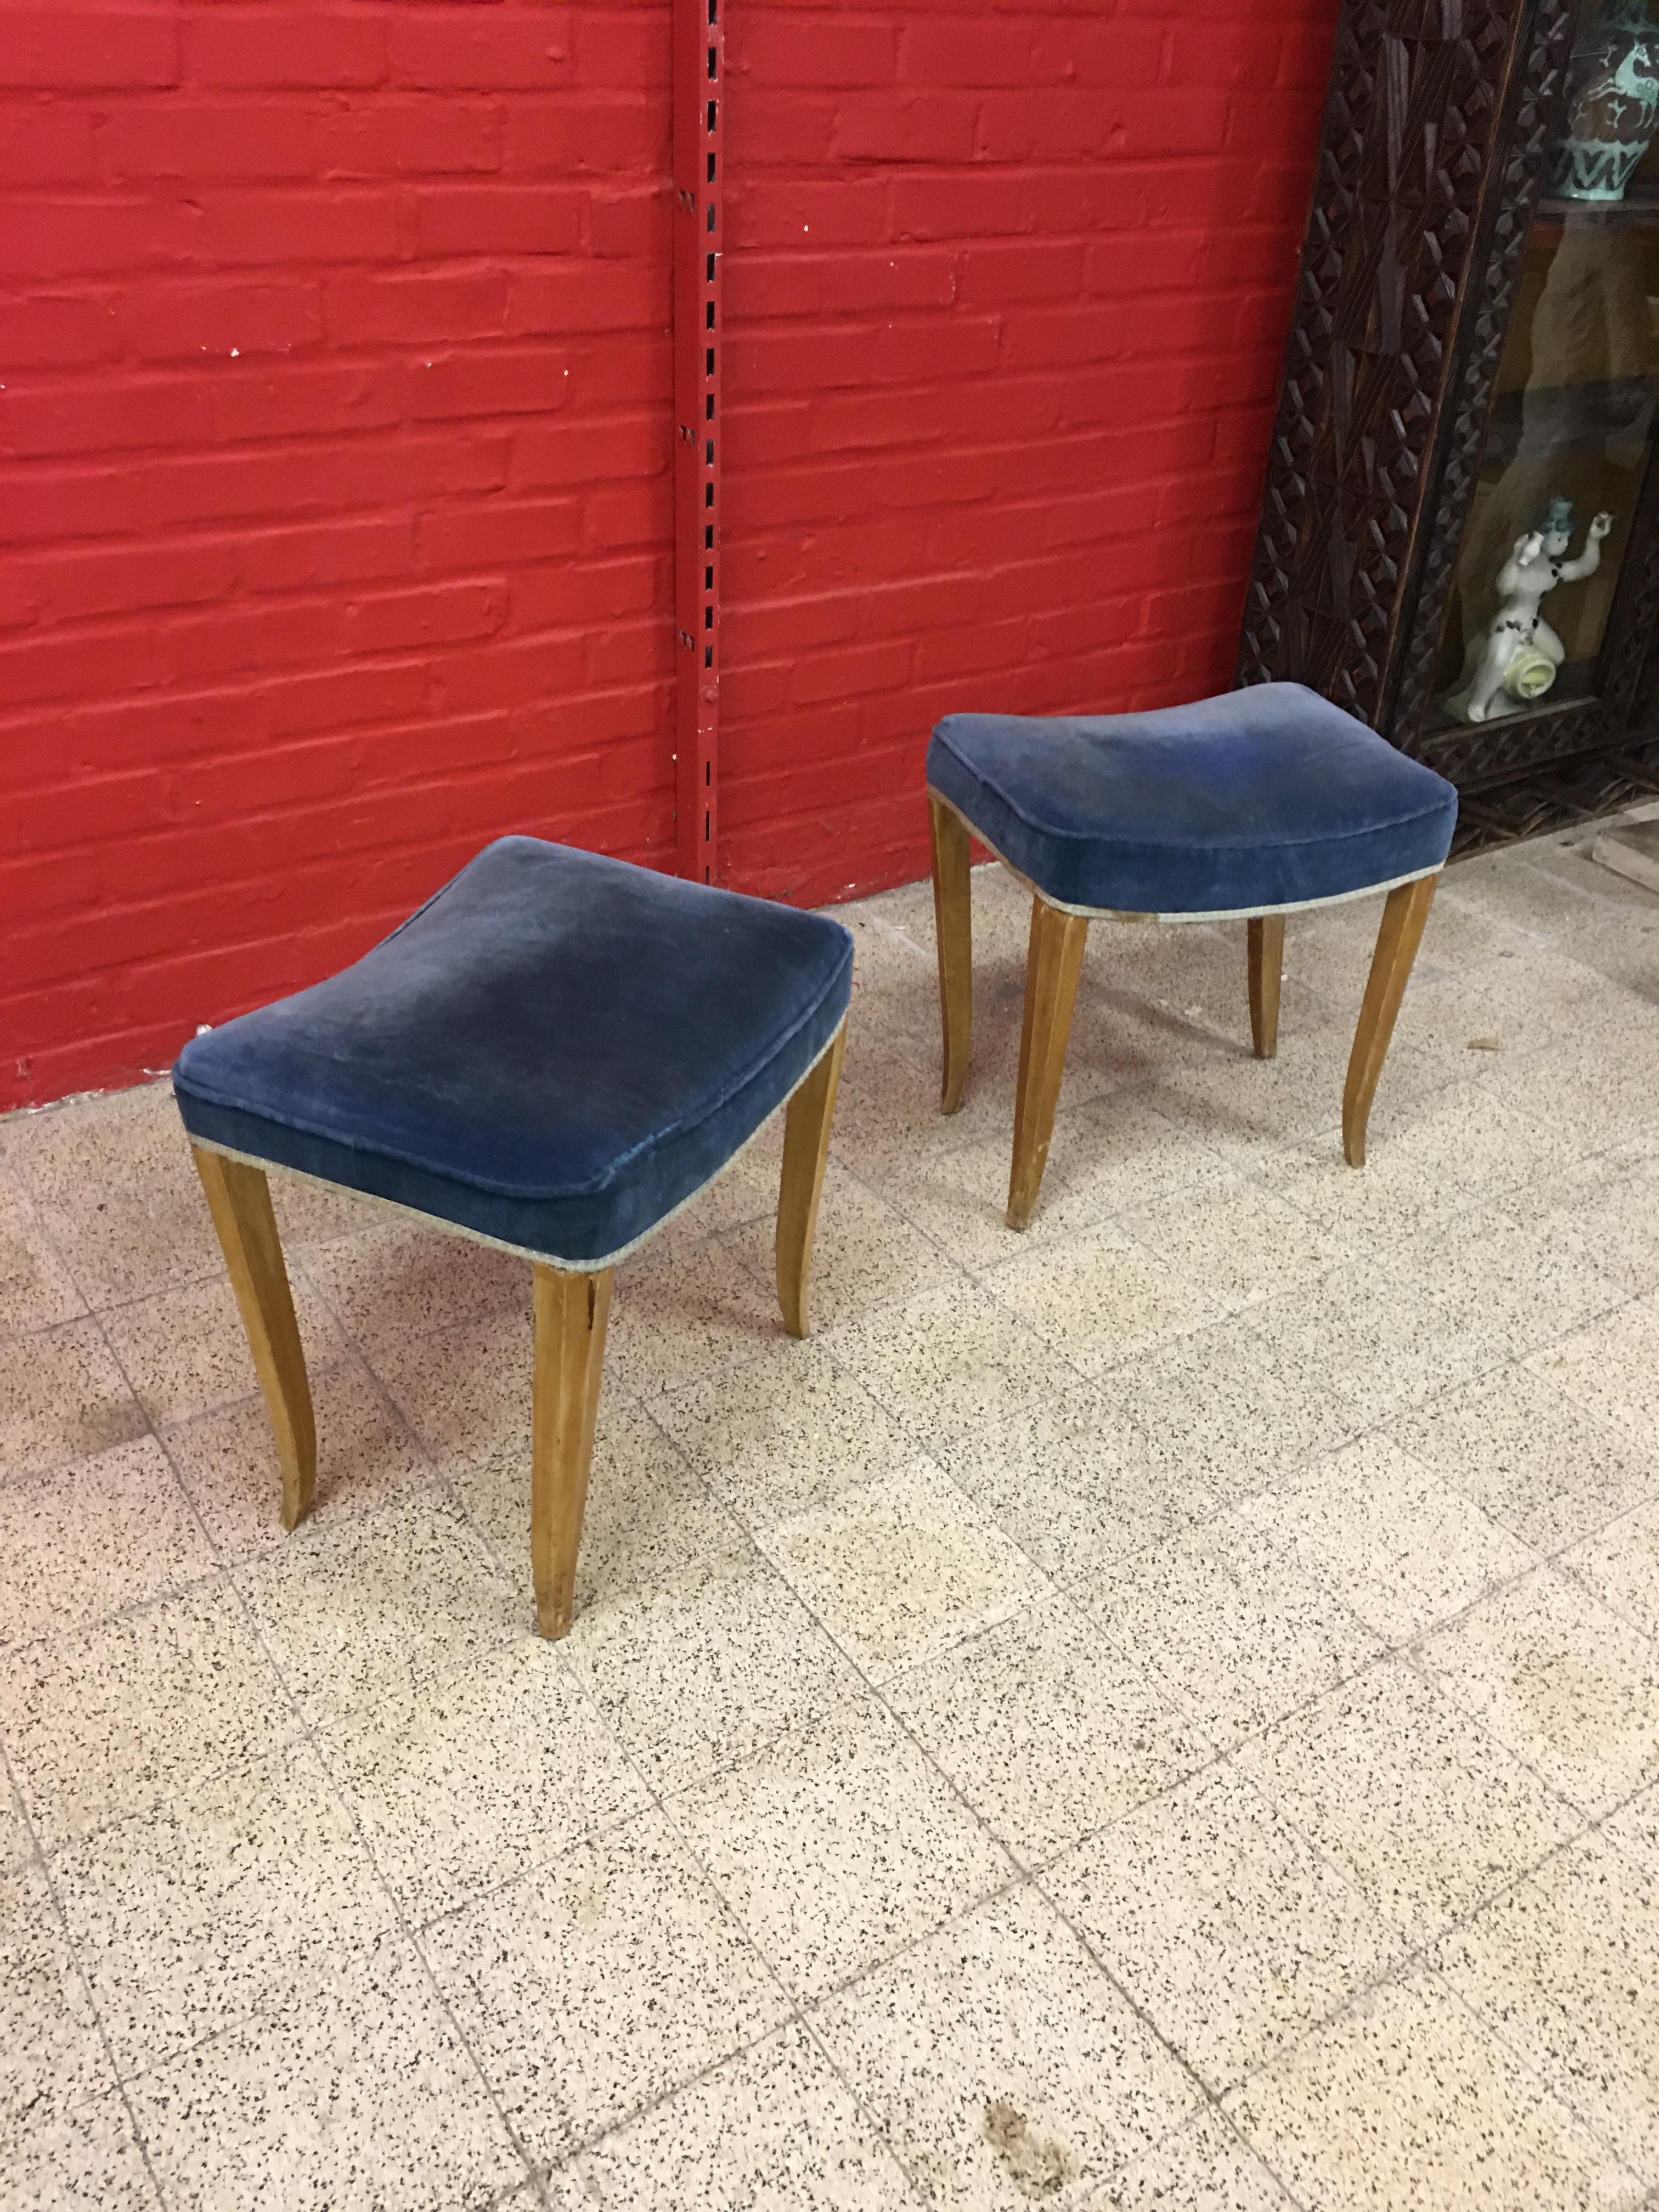 René Prou, 2 Art Deco Stools in Lacquered Wood and Blue Velvet, circa 1940-1950 For Sale 2